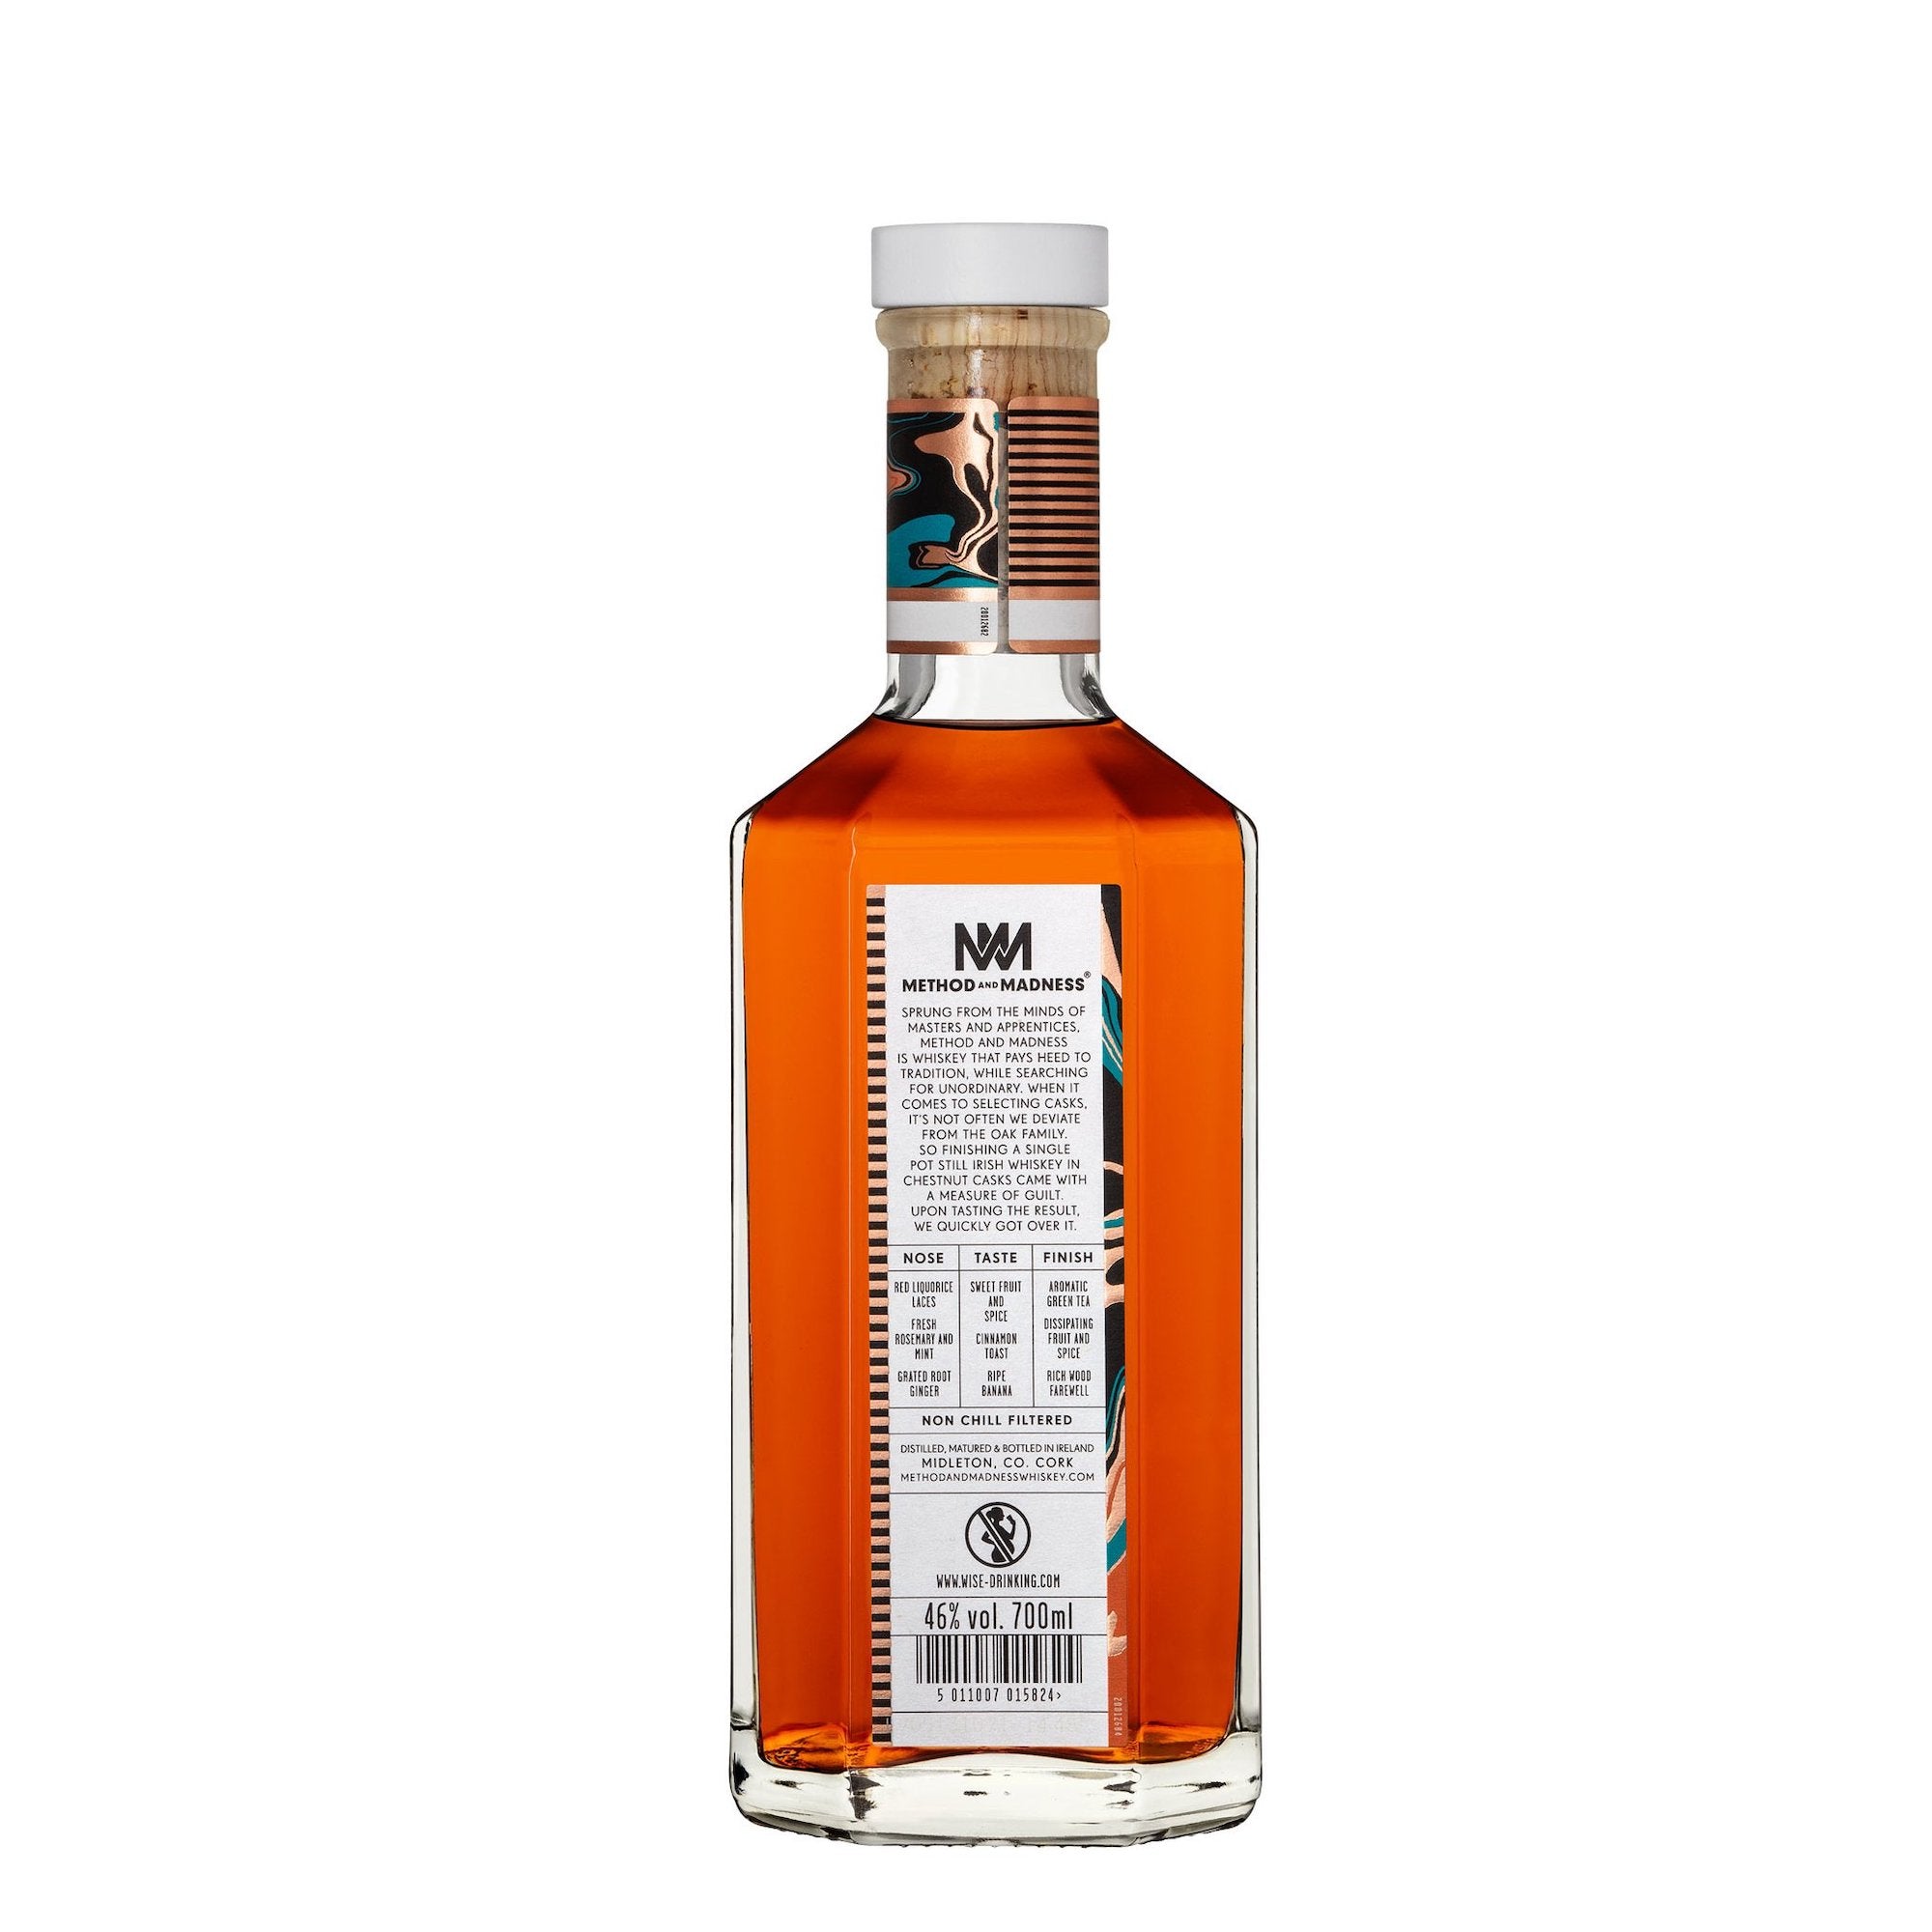 https://cdn.shopify.com/s/files/1/0060/7558/0489/products/Method-and-Madness-Single-Pot-Still-French-Chestnut-Irish-Whiskey-back_2048x_0d119935-a6ca-4446-878f-a4bf7e06ab5e.jpg?v=1632182638&width=2000